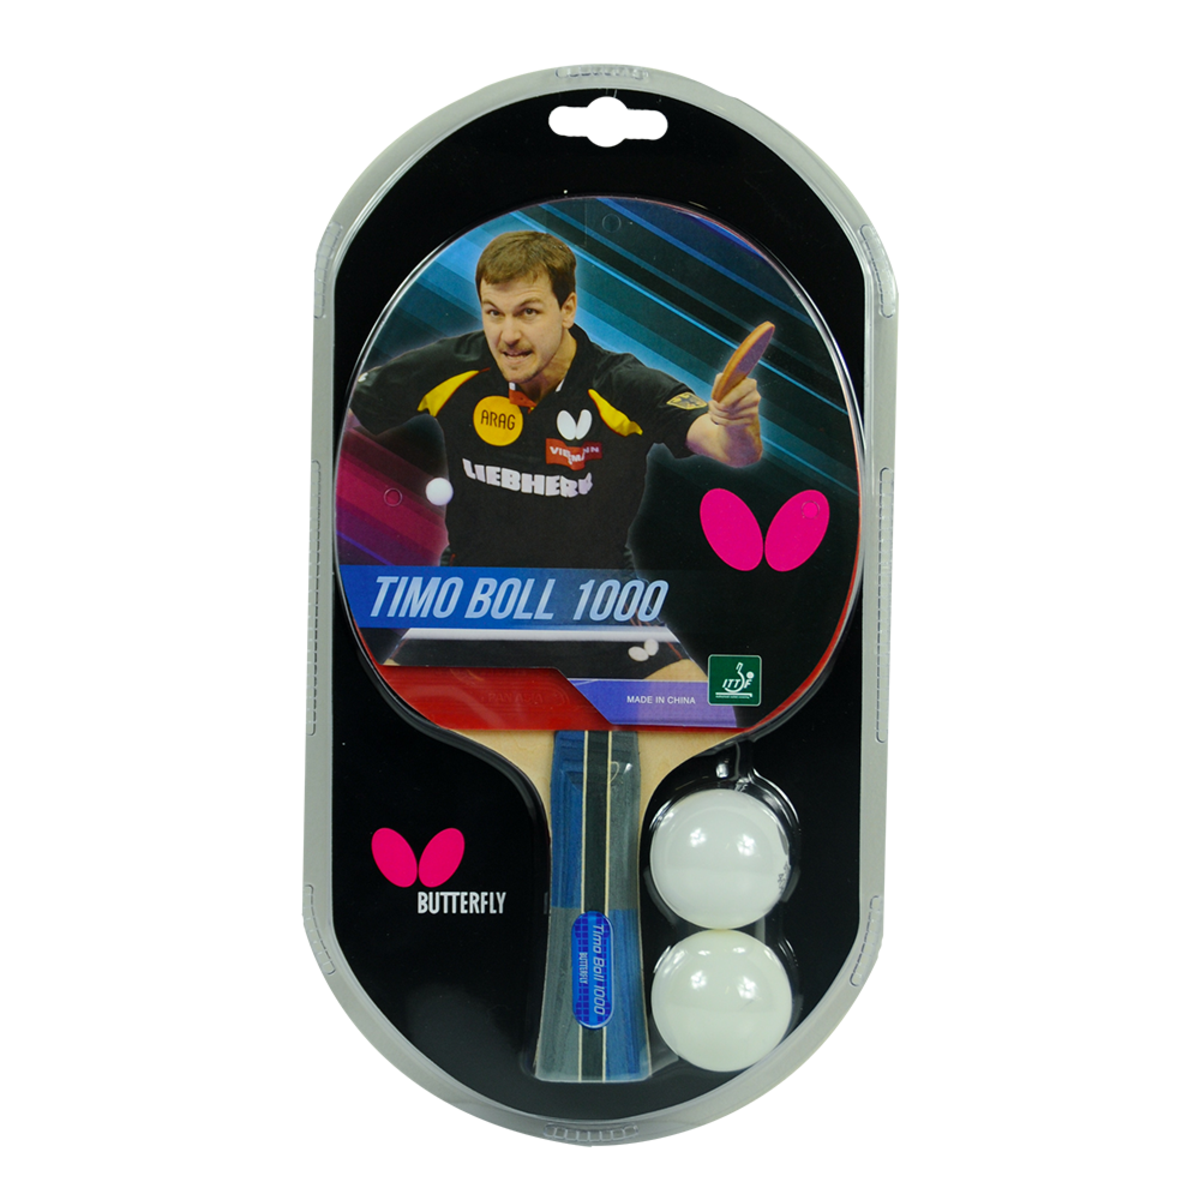 BUTTERFLY TIMO BOLL 1000 TABLE TENNIS BAT